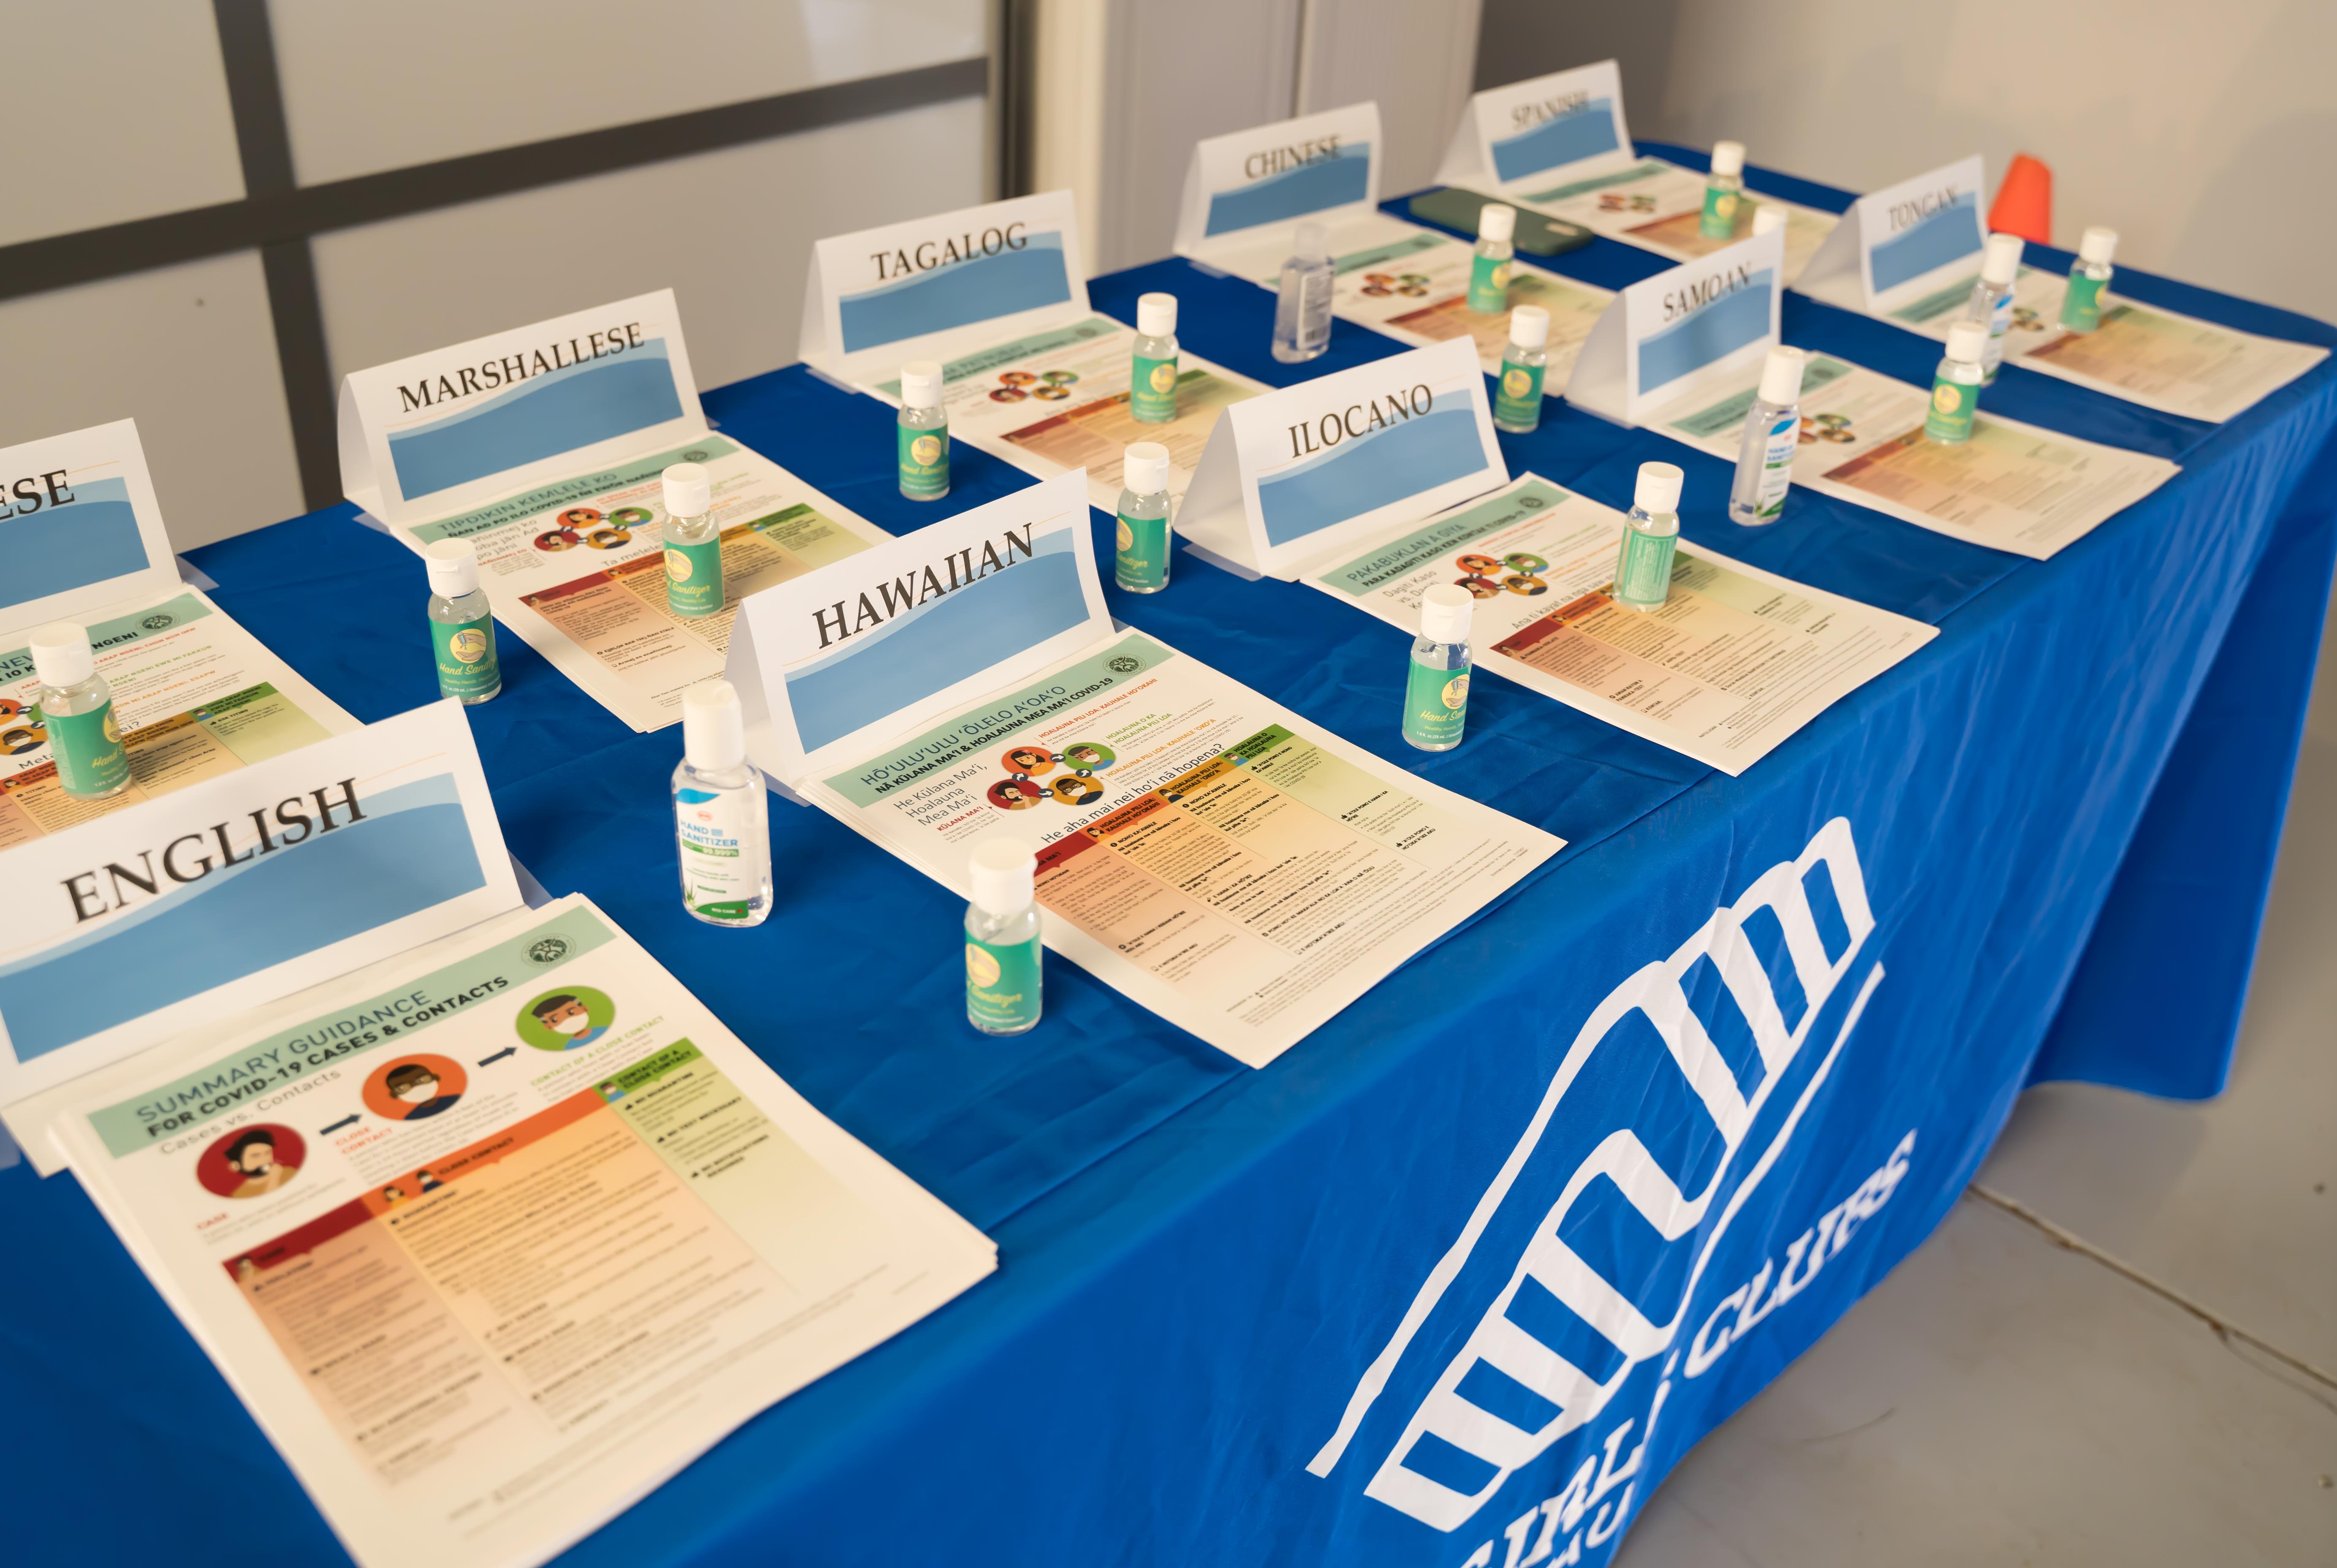 A display table contains numerous bottles of hand sanitizer and stacks of informational flyers with multiple languages available